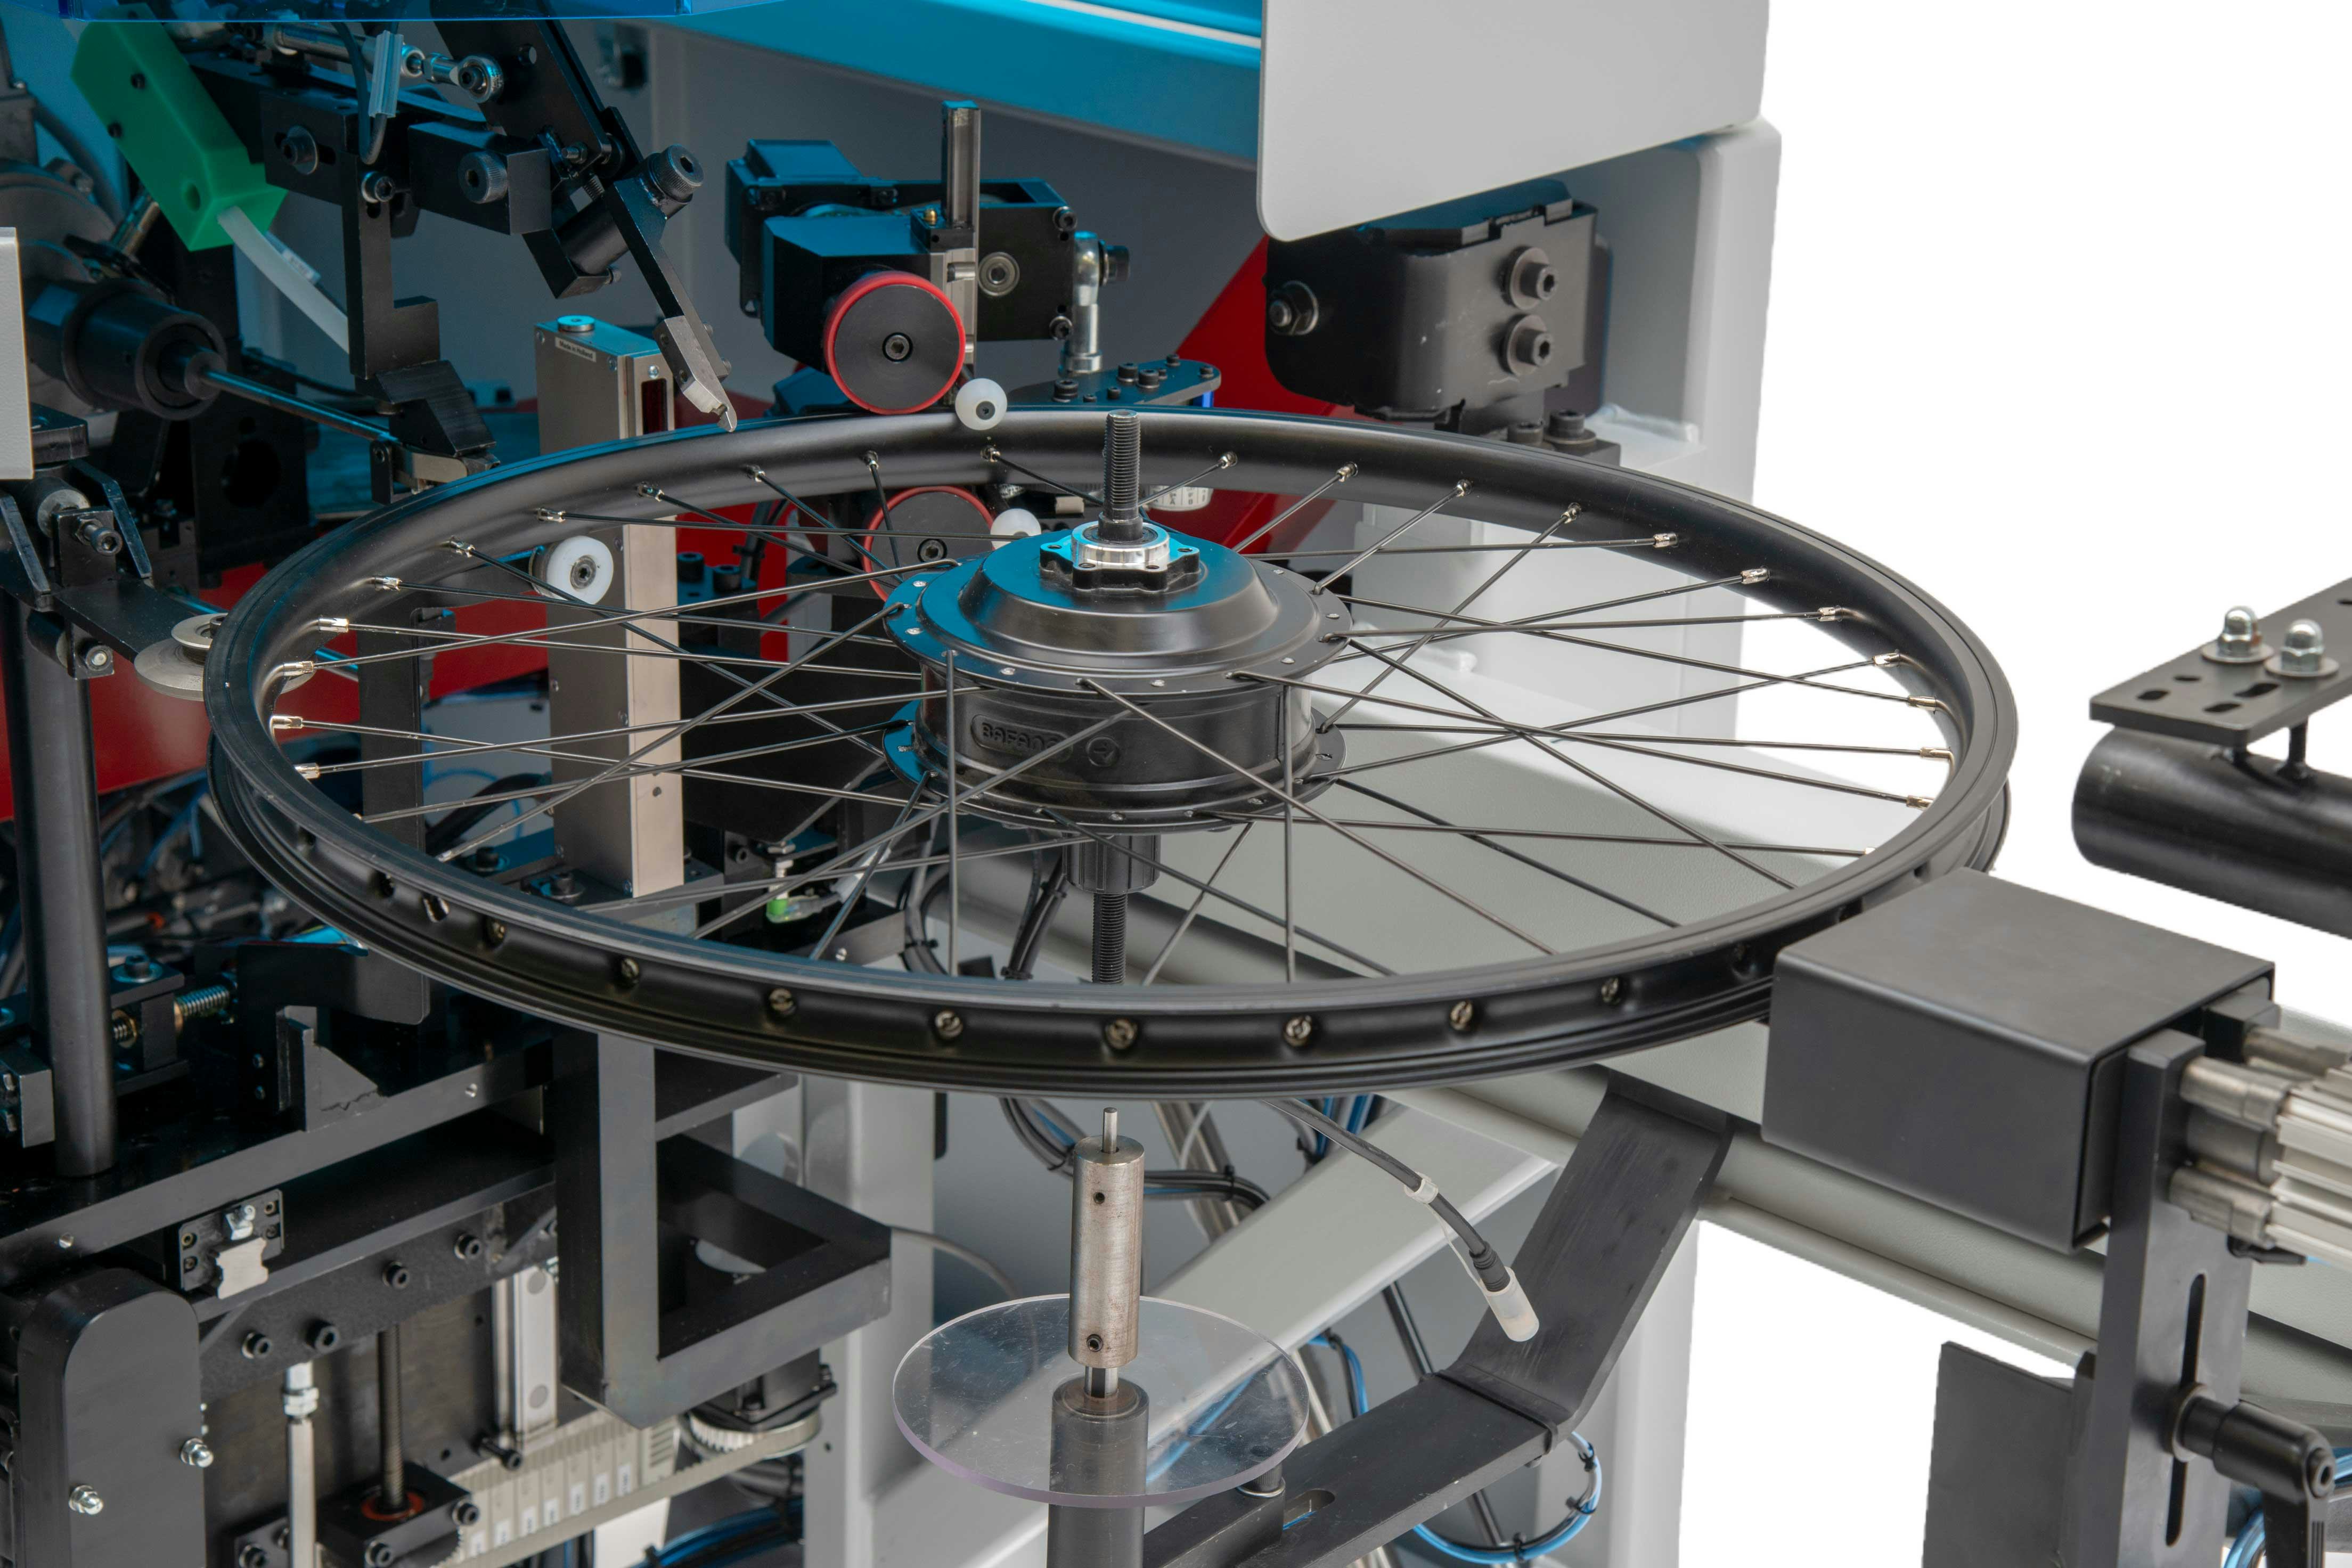 Holland Mechanics Offers Easier Wheel Assembly With Improved Quality For E-Bikes